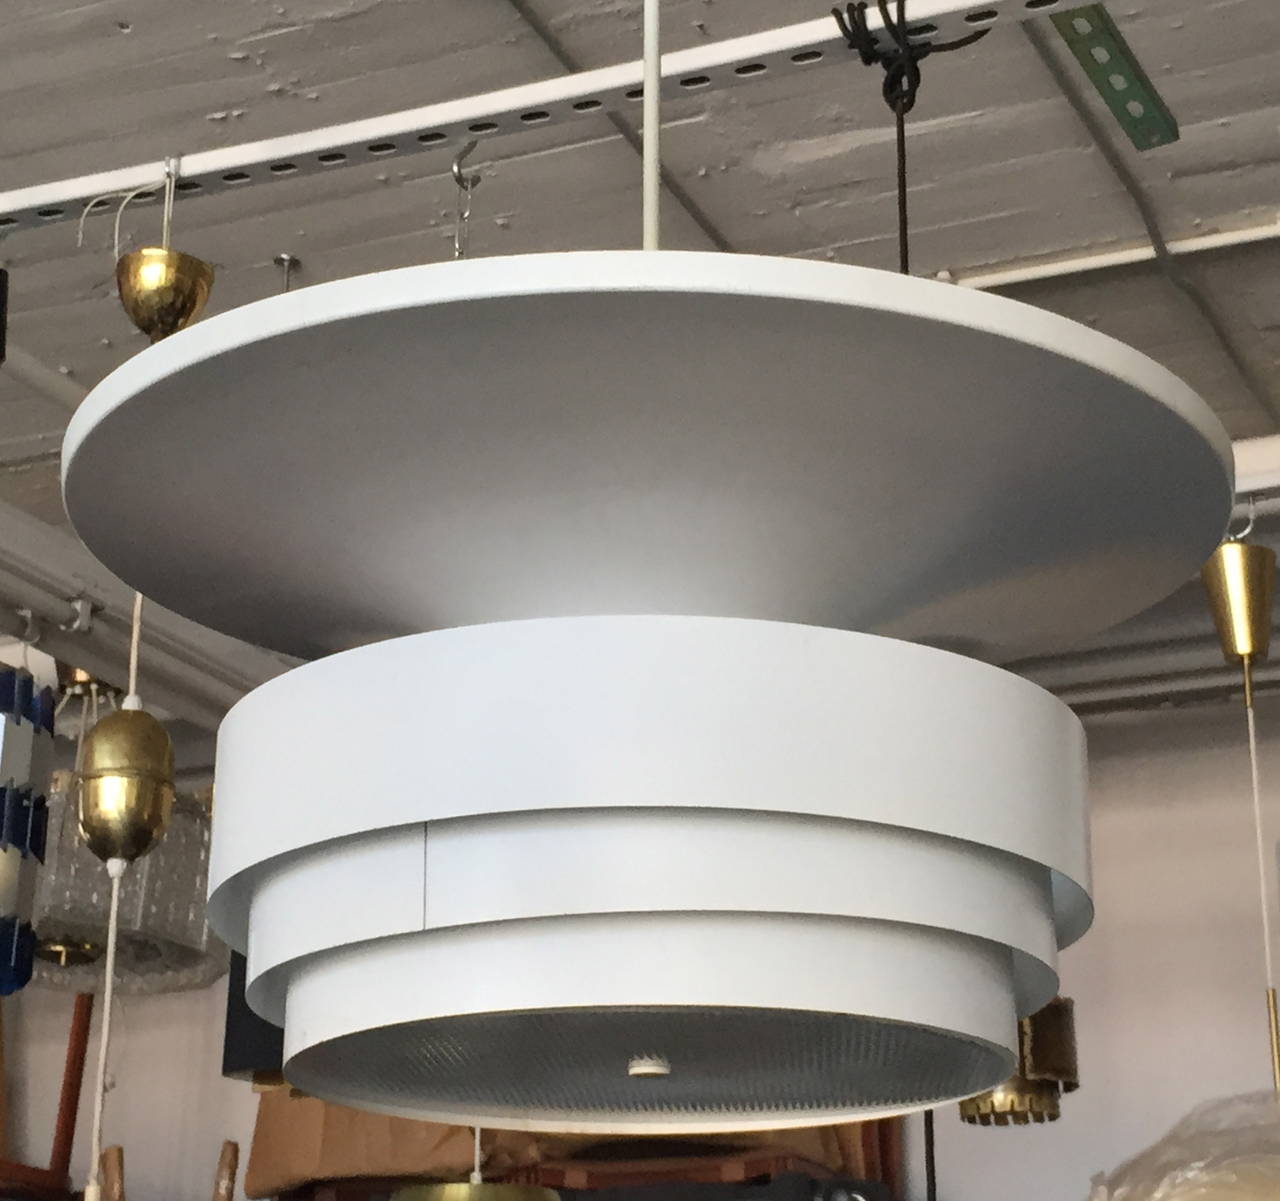 A pendant designed by Hans-Agne Jakobsson for Markaryd, Sweden.
White painted metal and plastic diffuser. Measure: Diameter 24